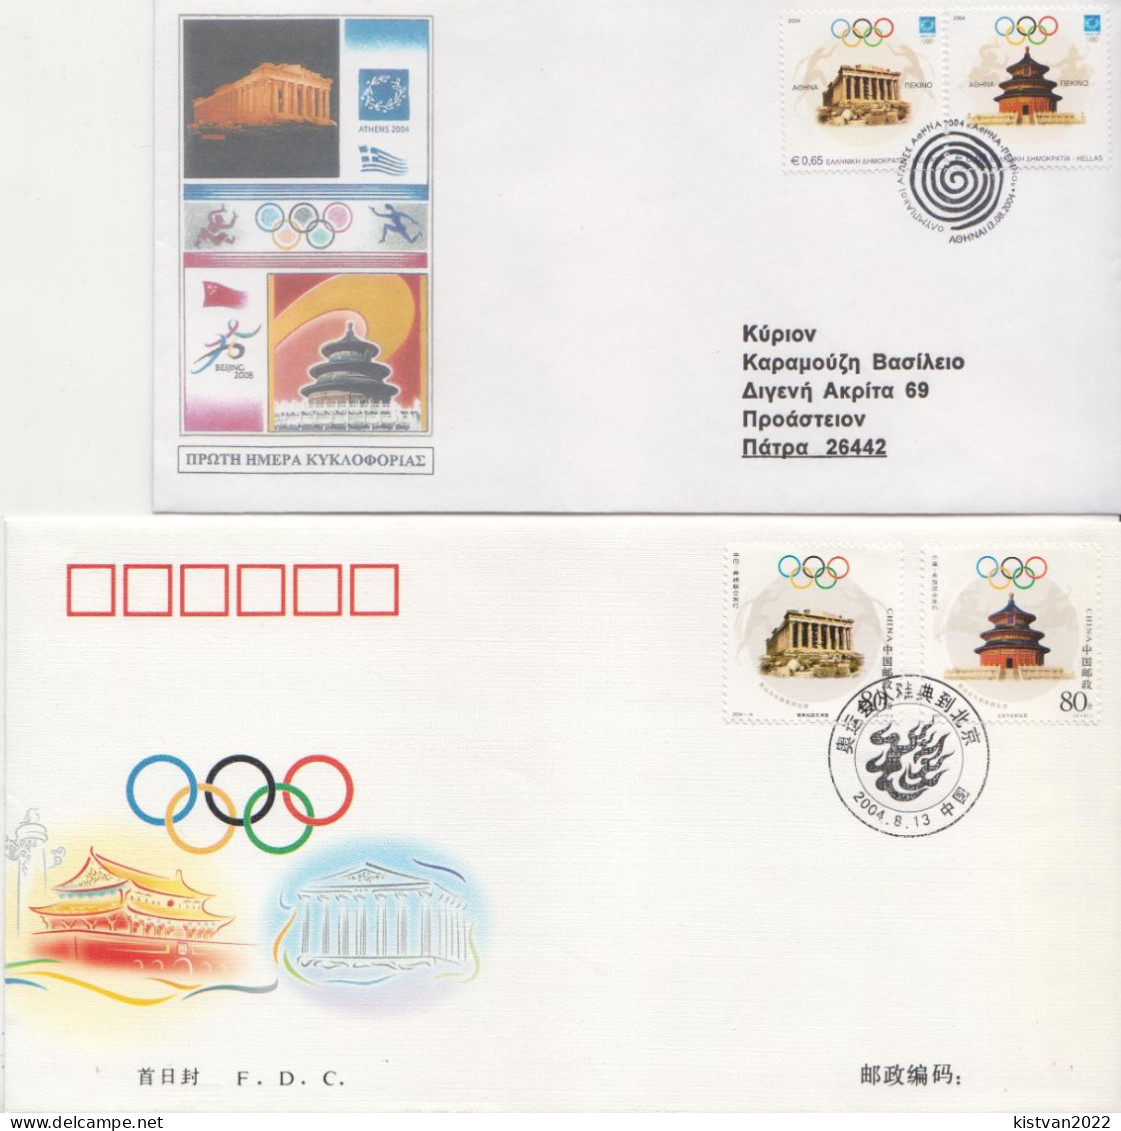 Joint Issues From Greece And China On 5 FDCs - Ete 2004: Athènes